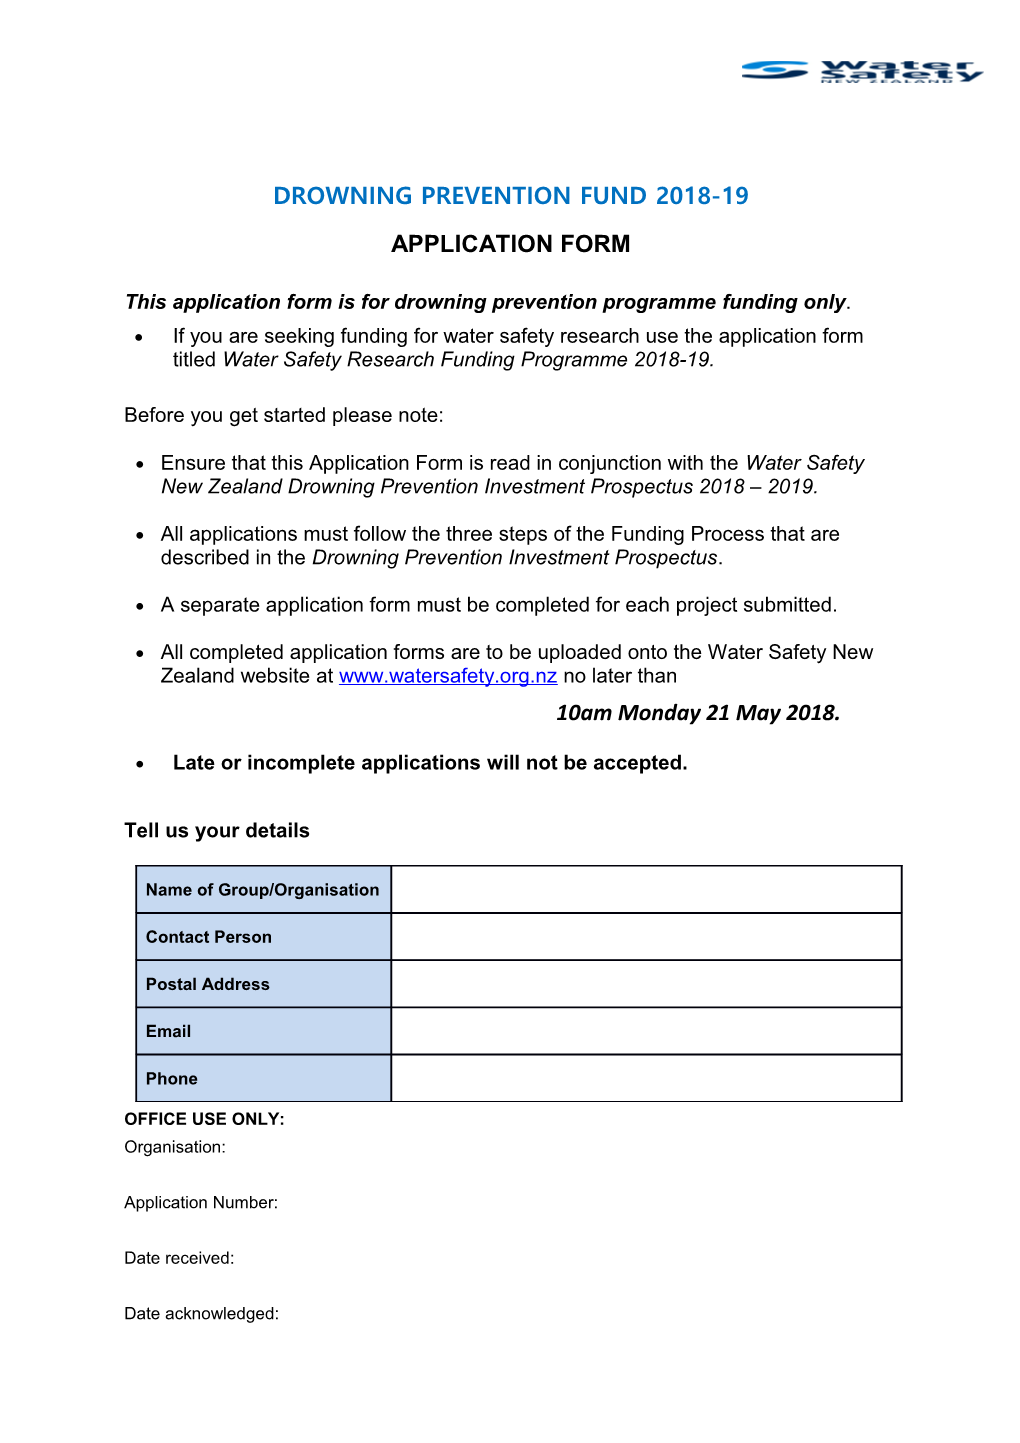 This Application Form Is for Drowning Prevention Programmefunding Only